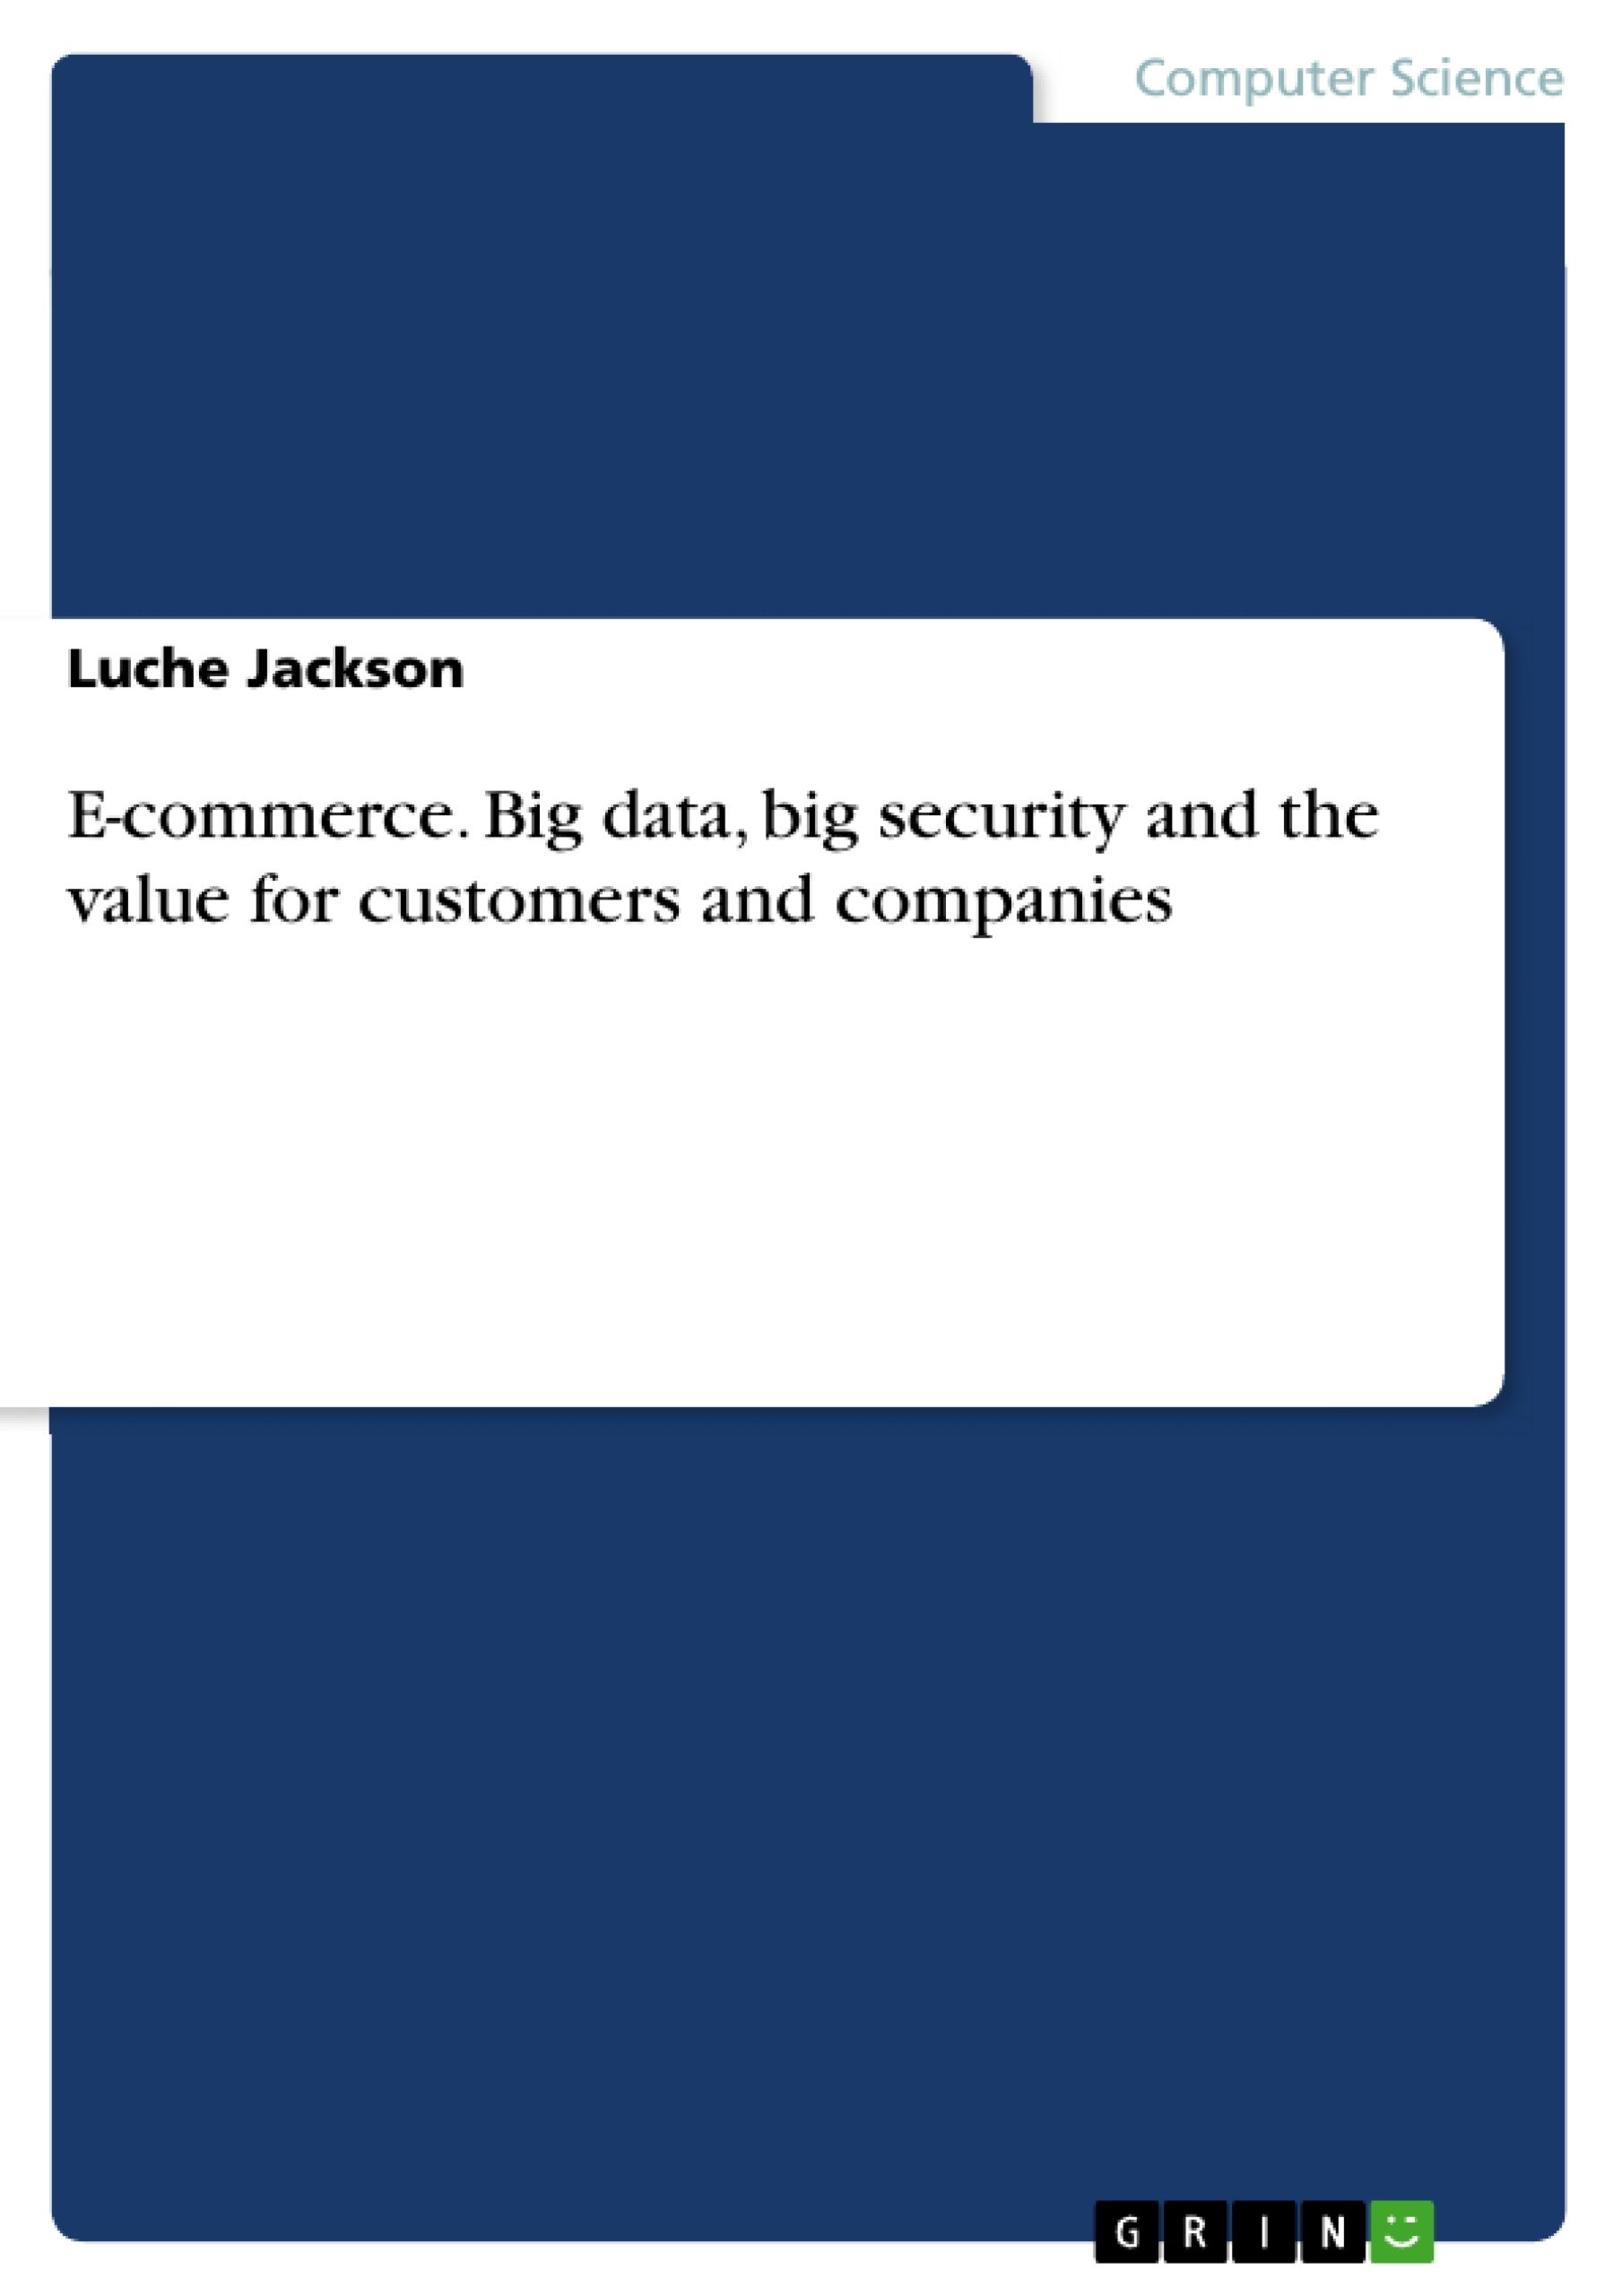 Title: E-commerce. Big data, big security and the value for customers and companies